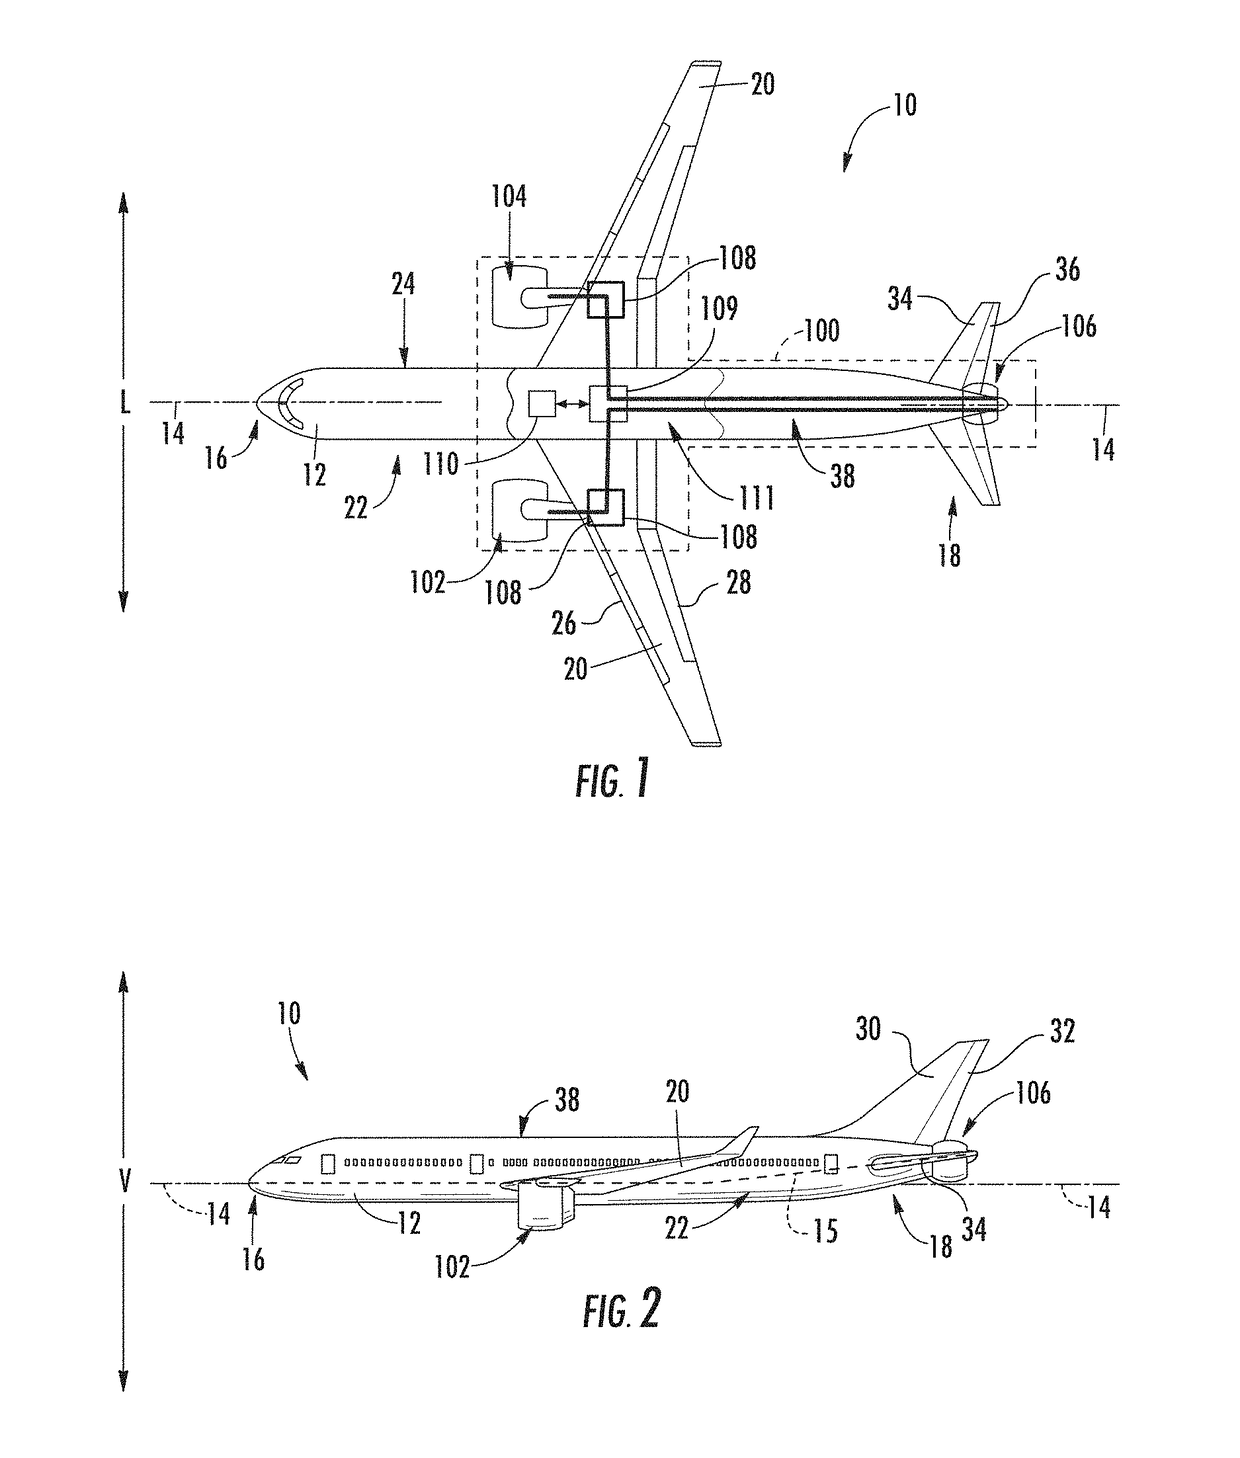 Propulsion engine for an aircraft